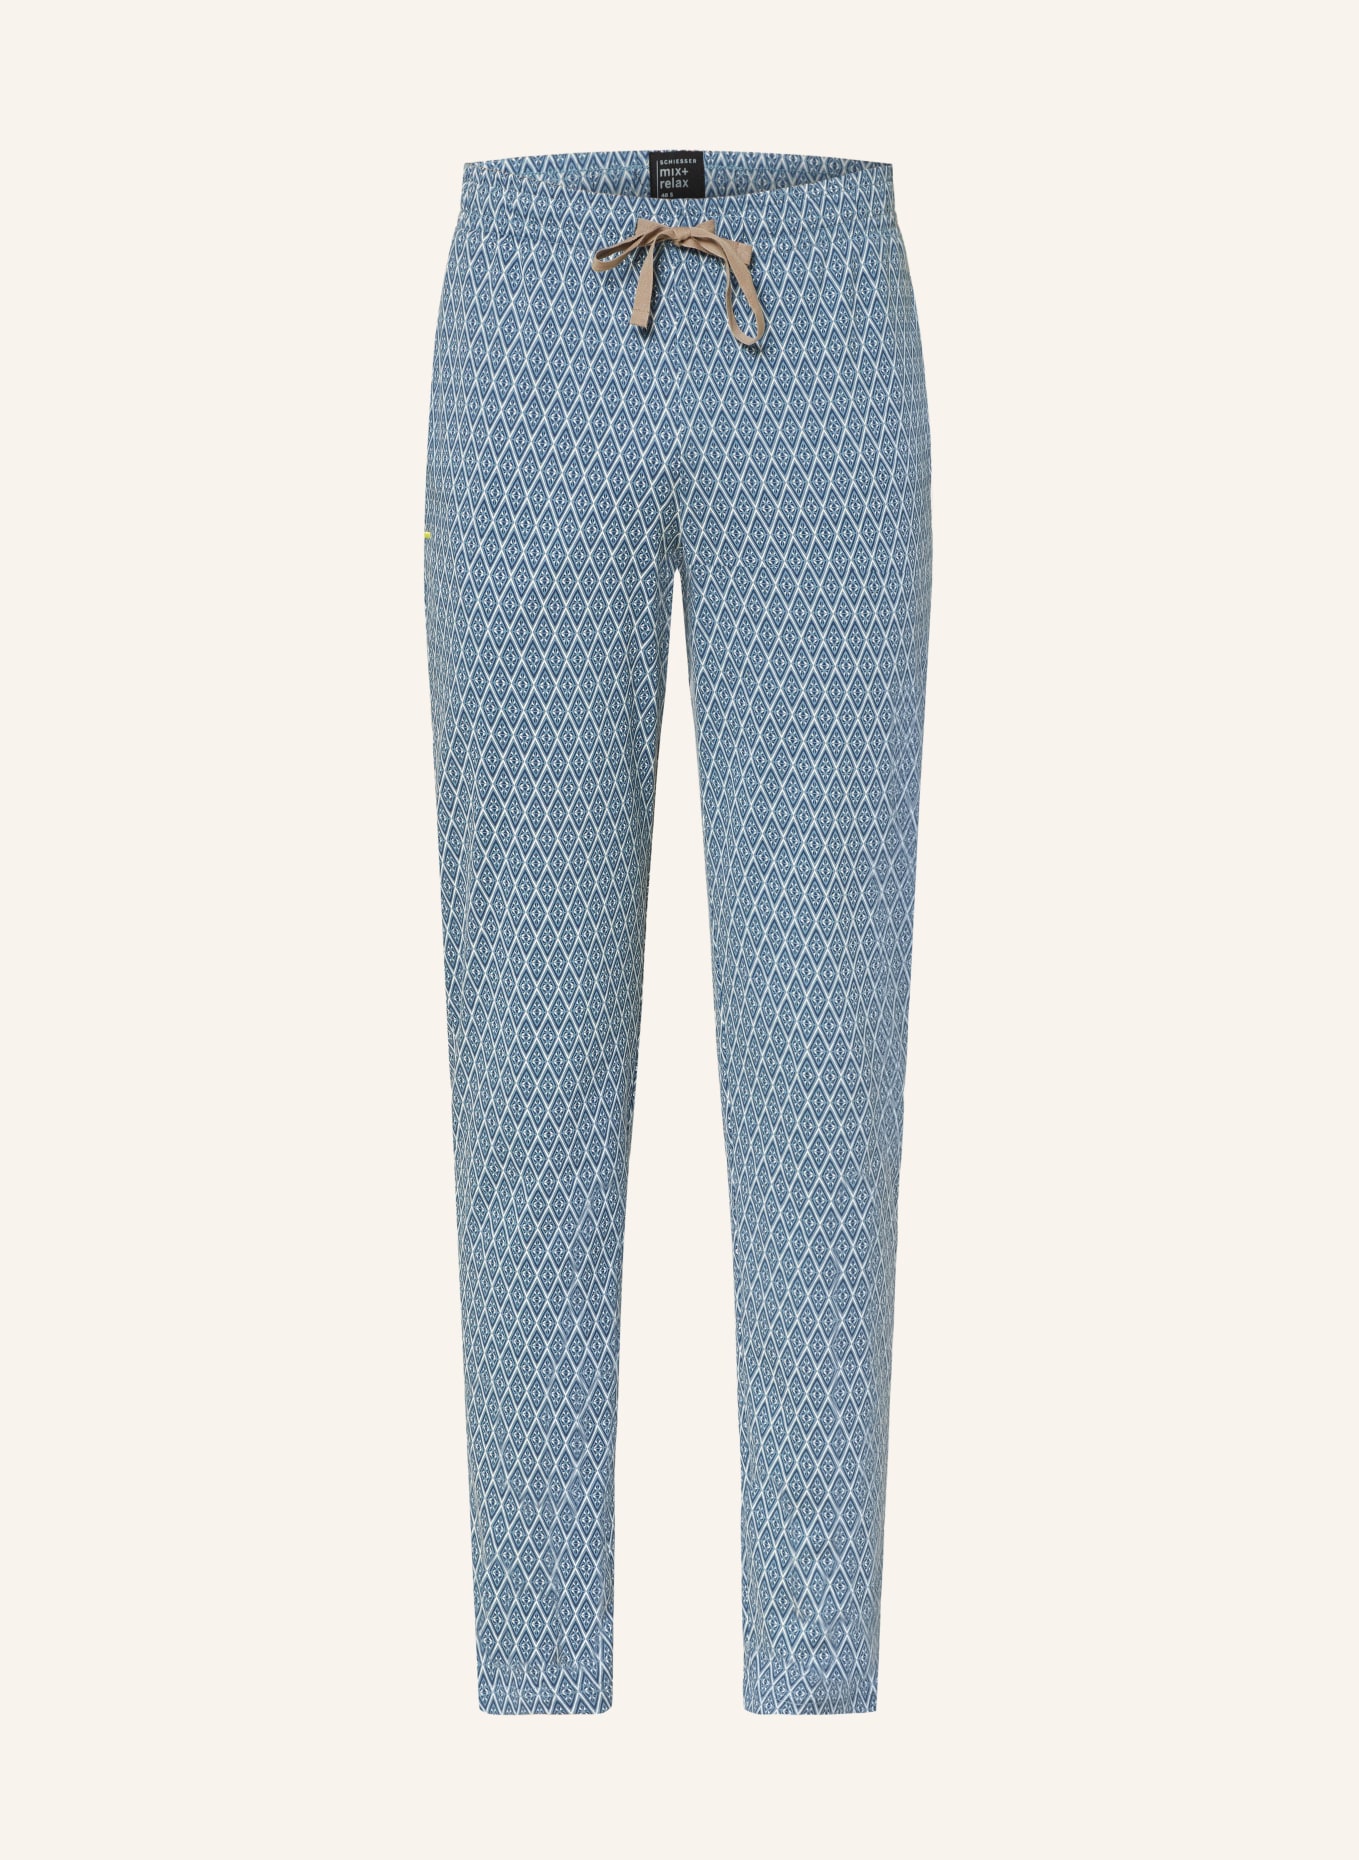 SCHIESSER Pajama pants MIX + RELAX, Color: BLUE GRAY/ BLUE/ WHITE (Image 1)